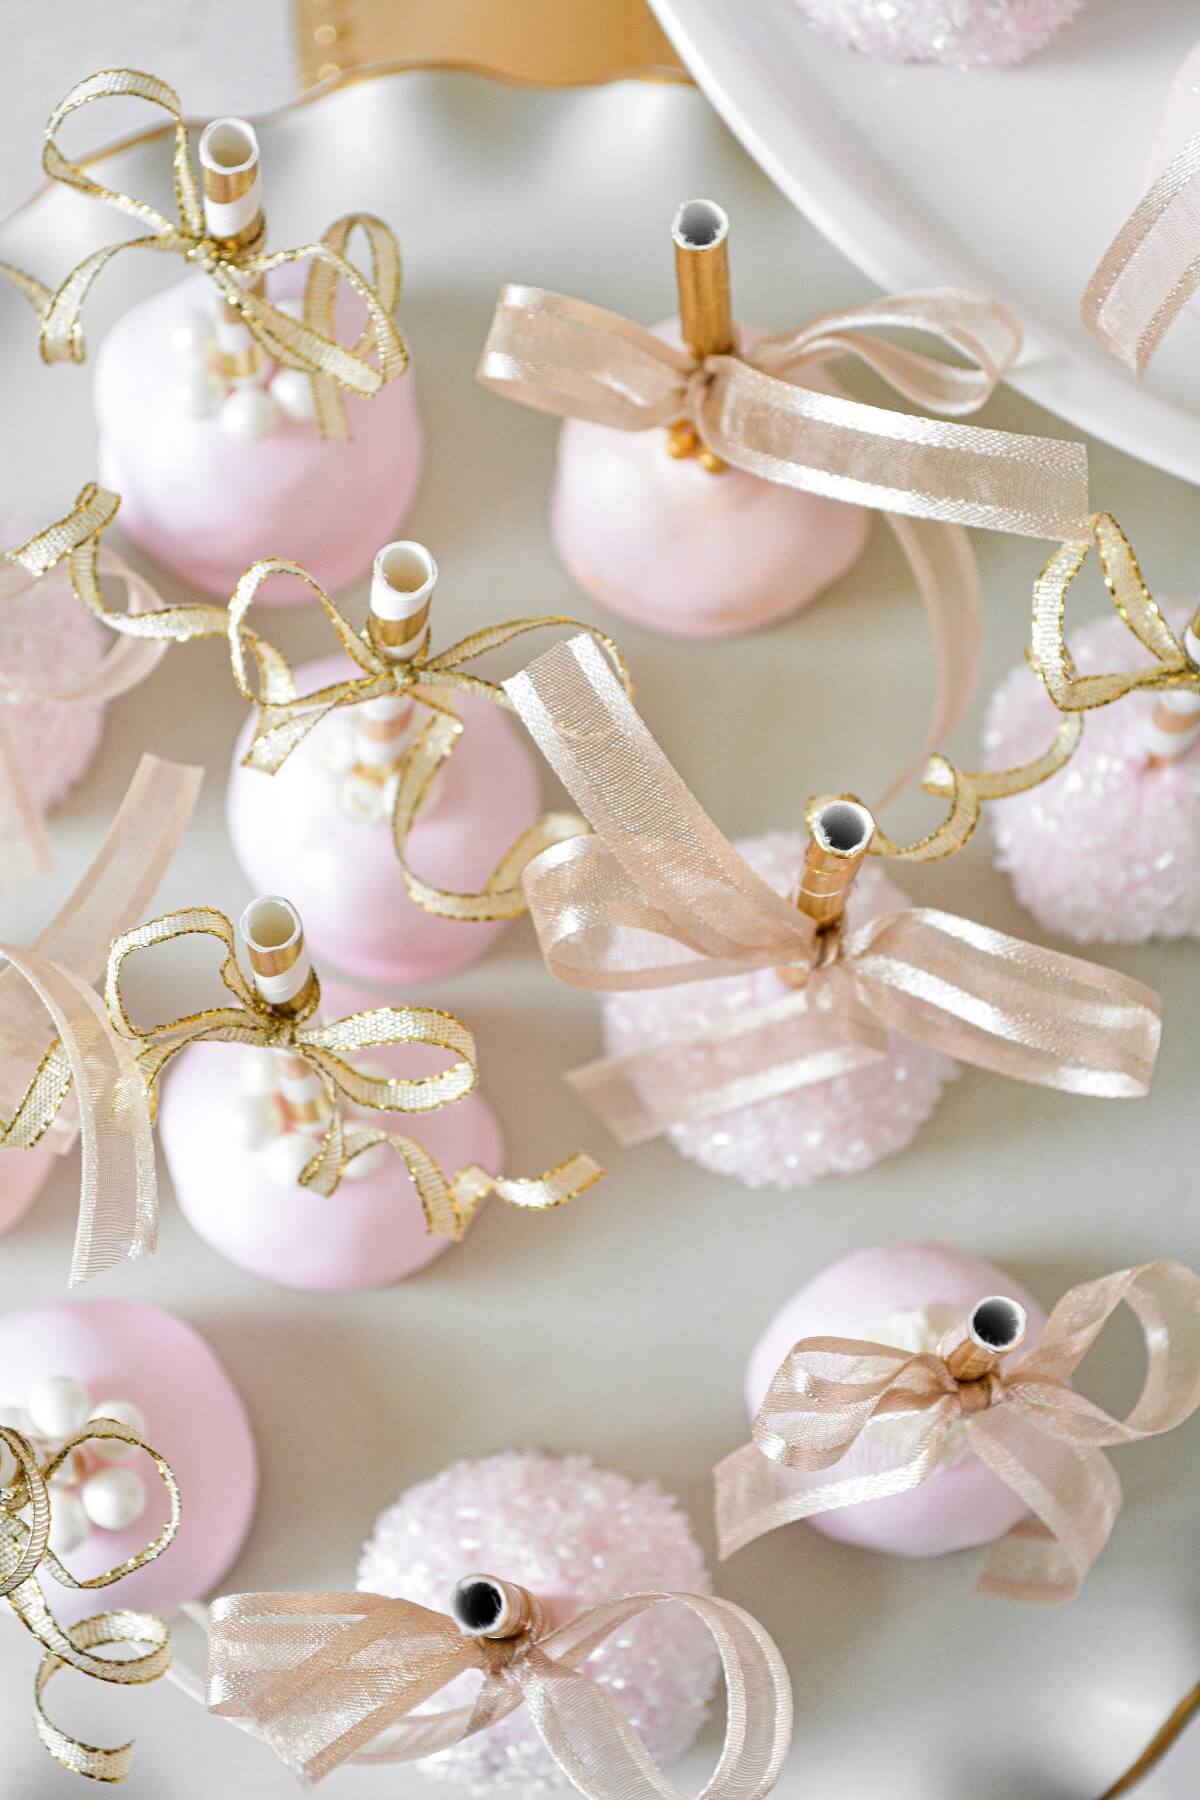 Pink and gold princess party cake pops with gold ribbons.